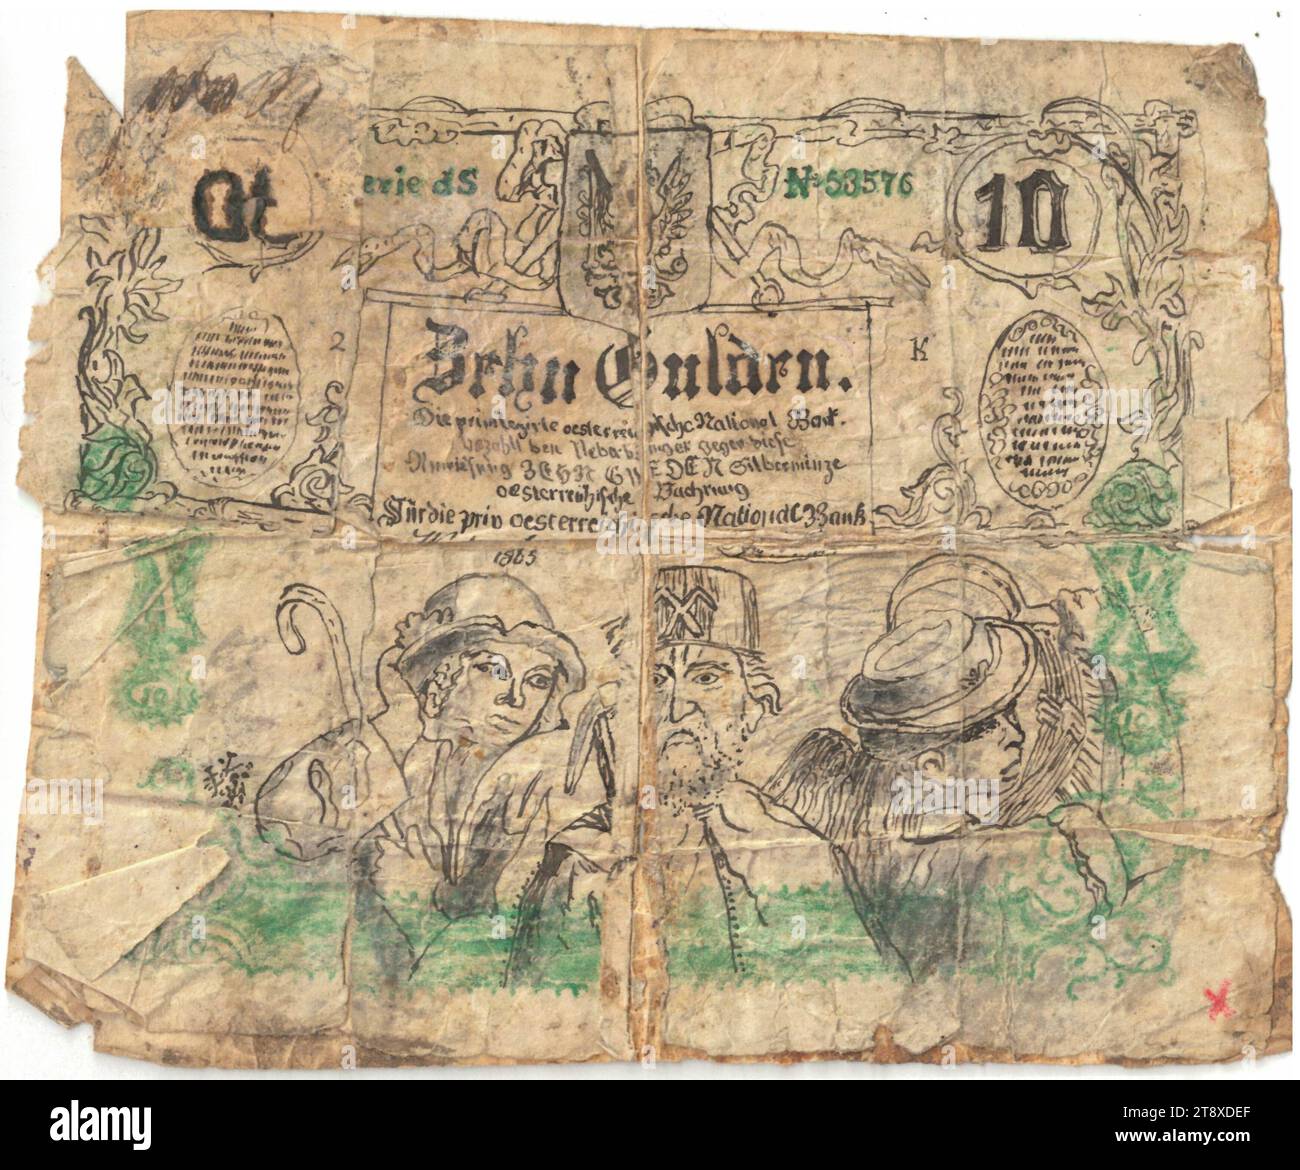 Banknote (forgery), 10 Gulden, Privilegierte Österreichische National-Bank, mint authority, Date after 15.01.1863, paper, printing, height 120 mm, width 145 mm, Mint, Vienna, Mint territory, Austria, Empire (1804-1867), Finance, counterfeit, forgery, farmers, working class, laborers, coat of arms (as symbol of the state, etc.), bank-note, money, The Vienna Collection Stock Photo